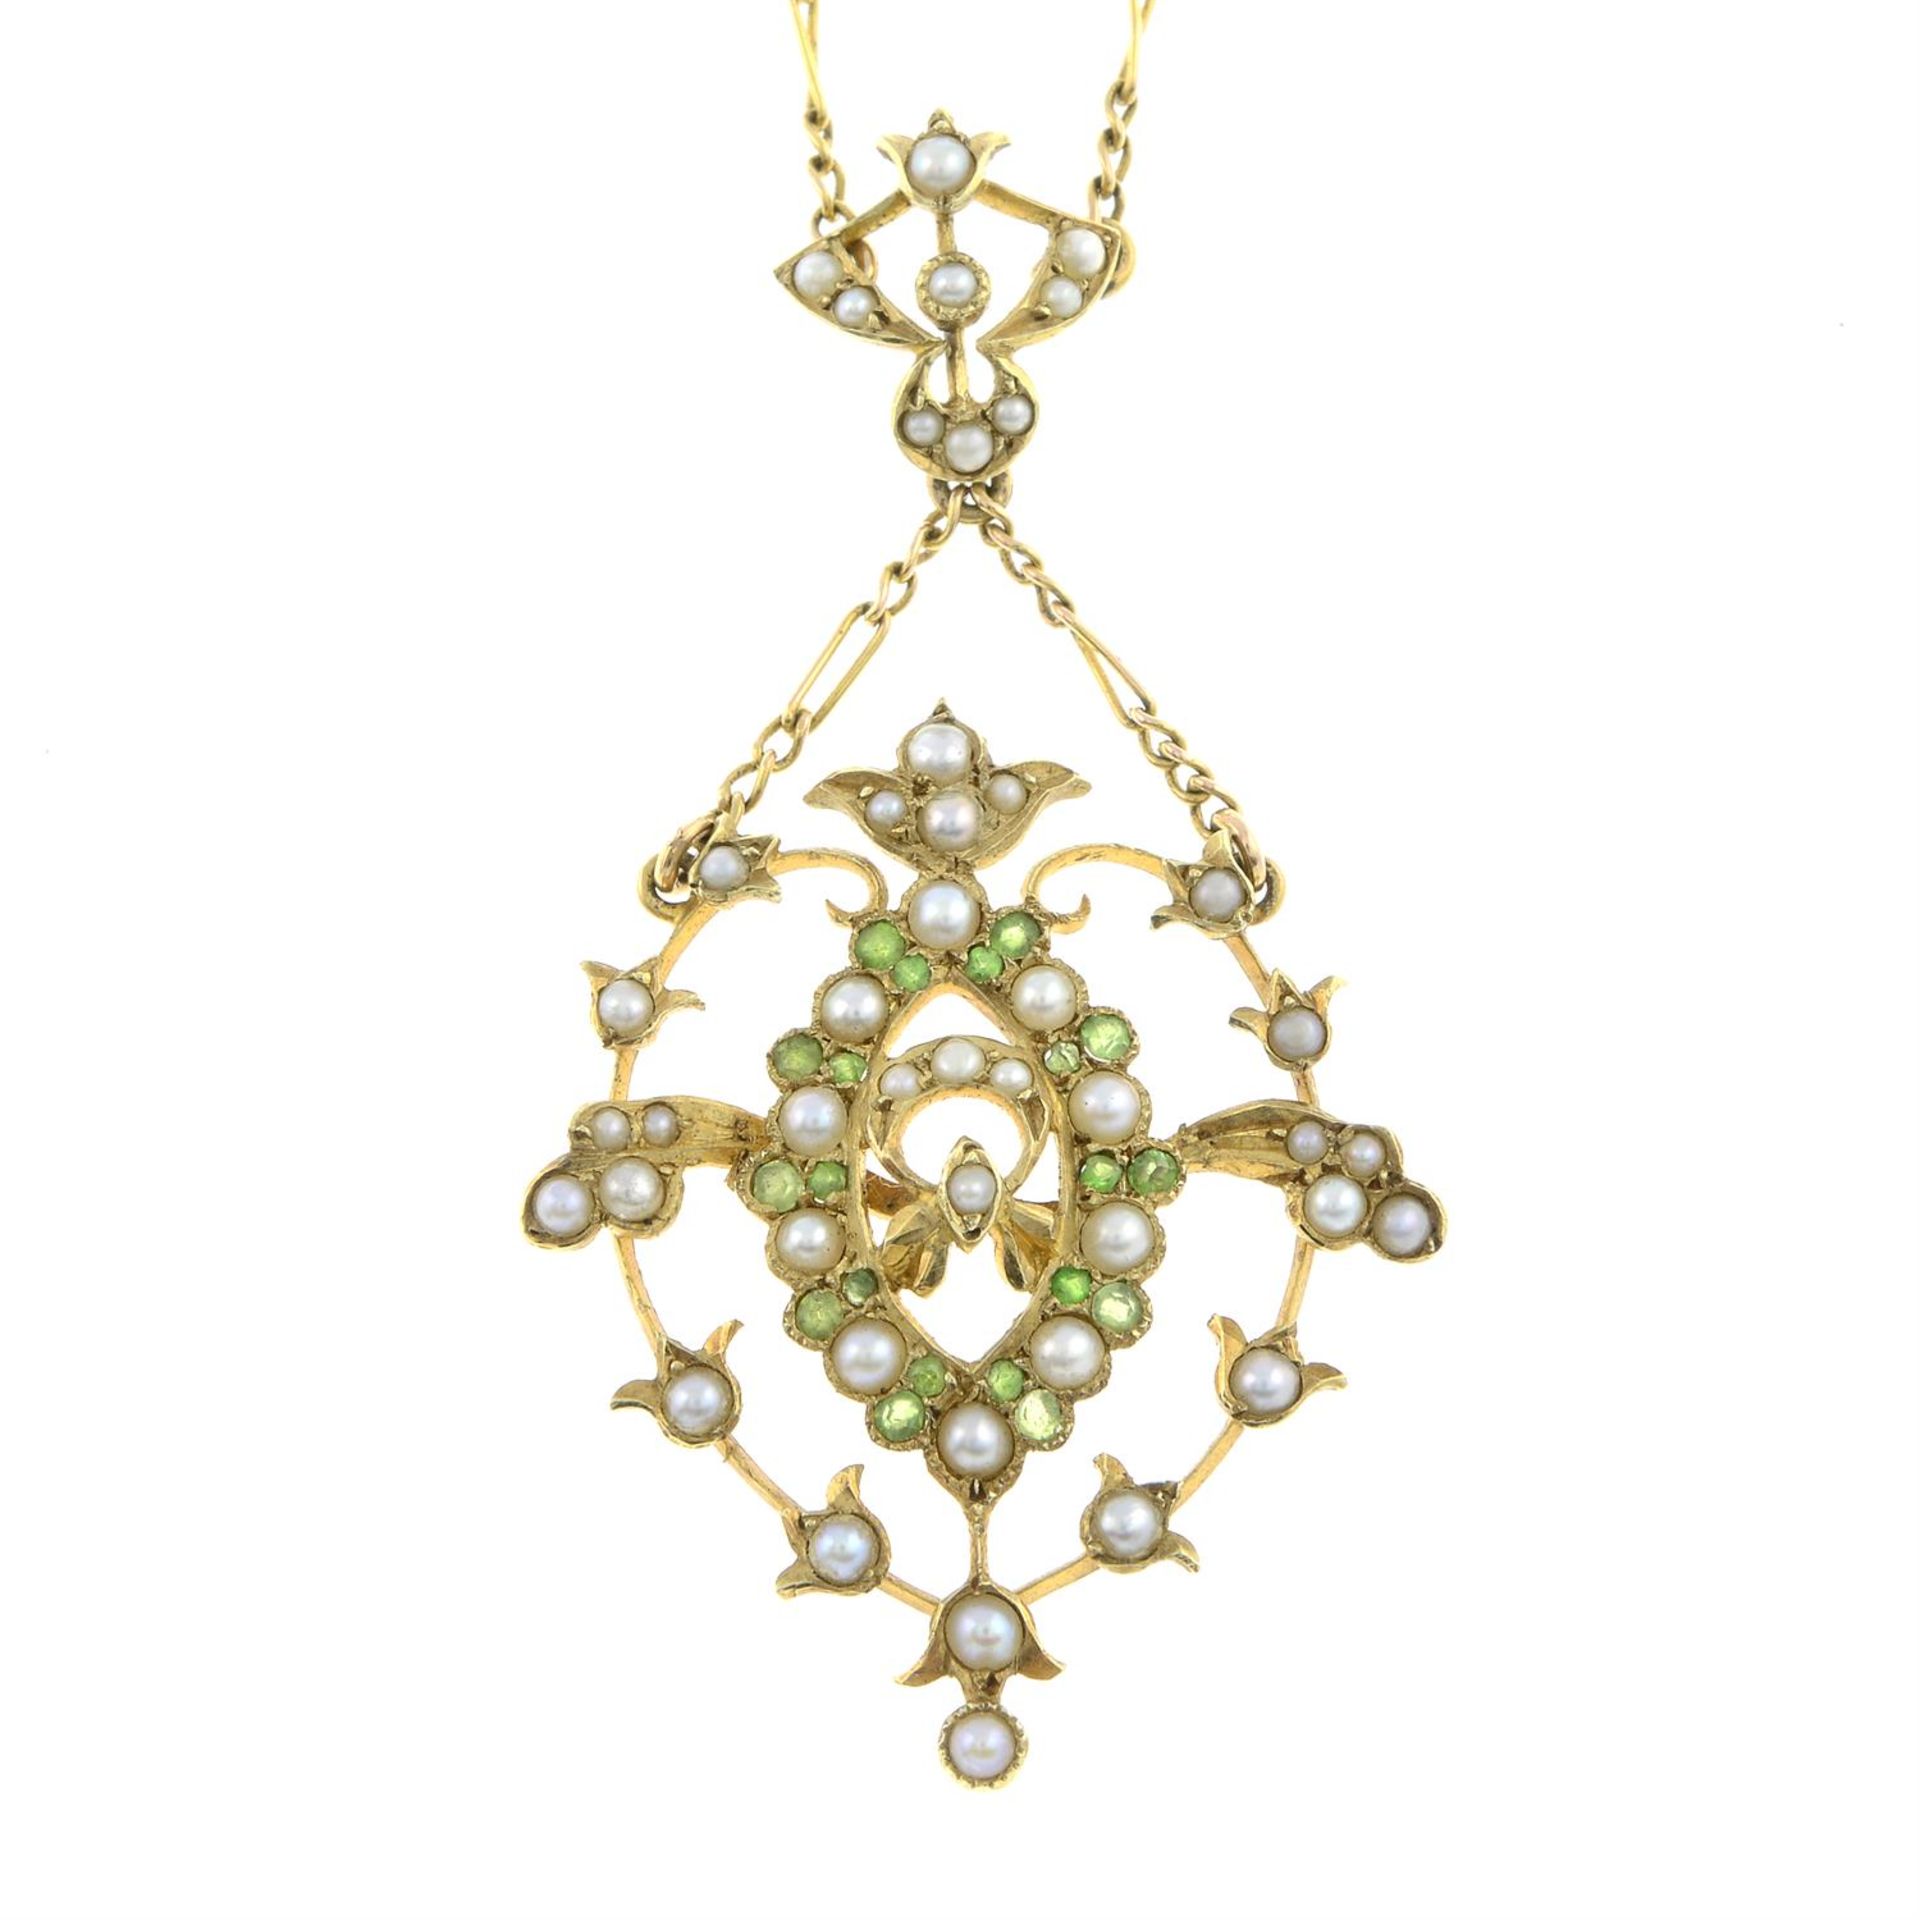 An early 20th century 15ct gold demantoid garnet and split pearl pendant, on an integral chain.